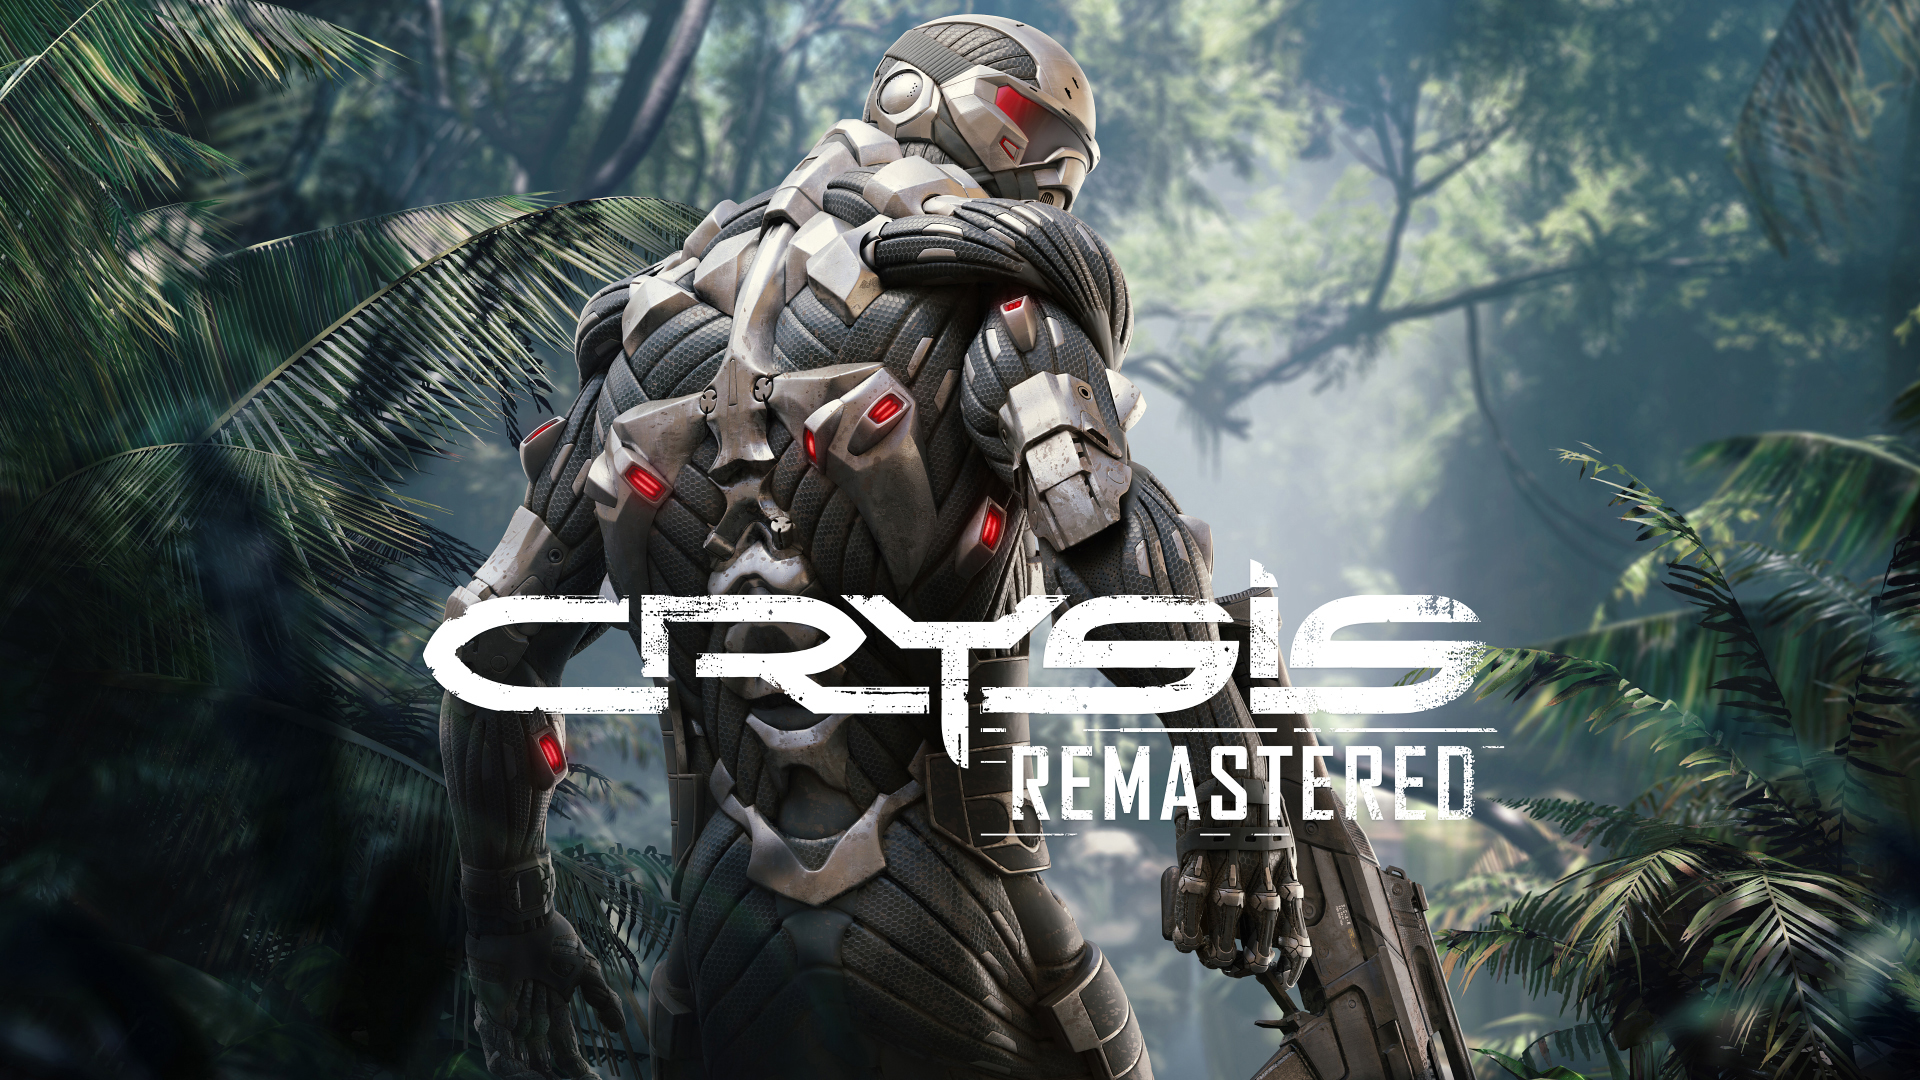 Crysis Remastered: September release on PC, PS4 and Xbox One